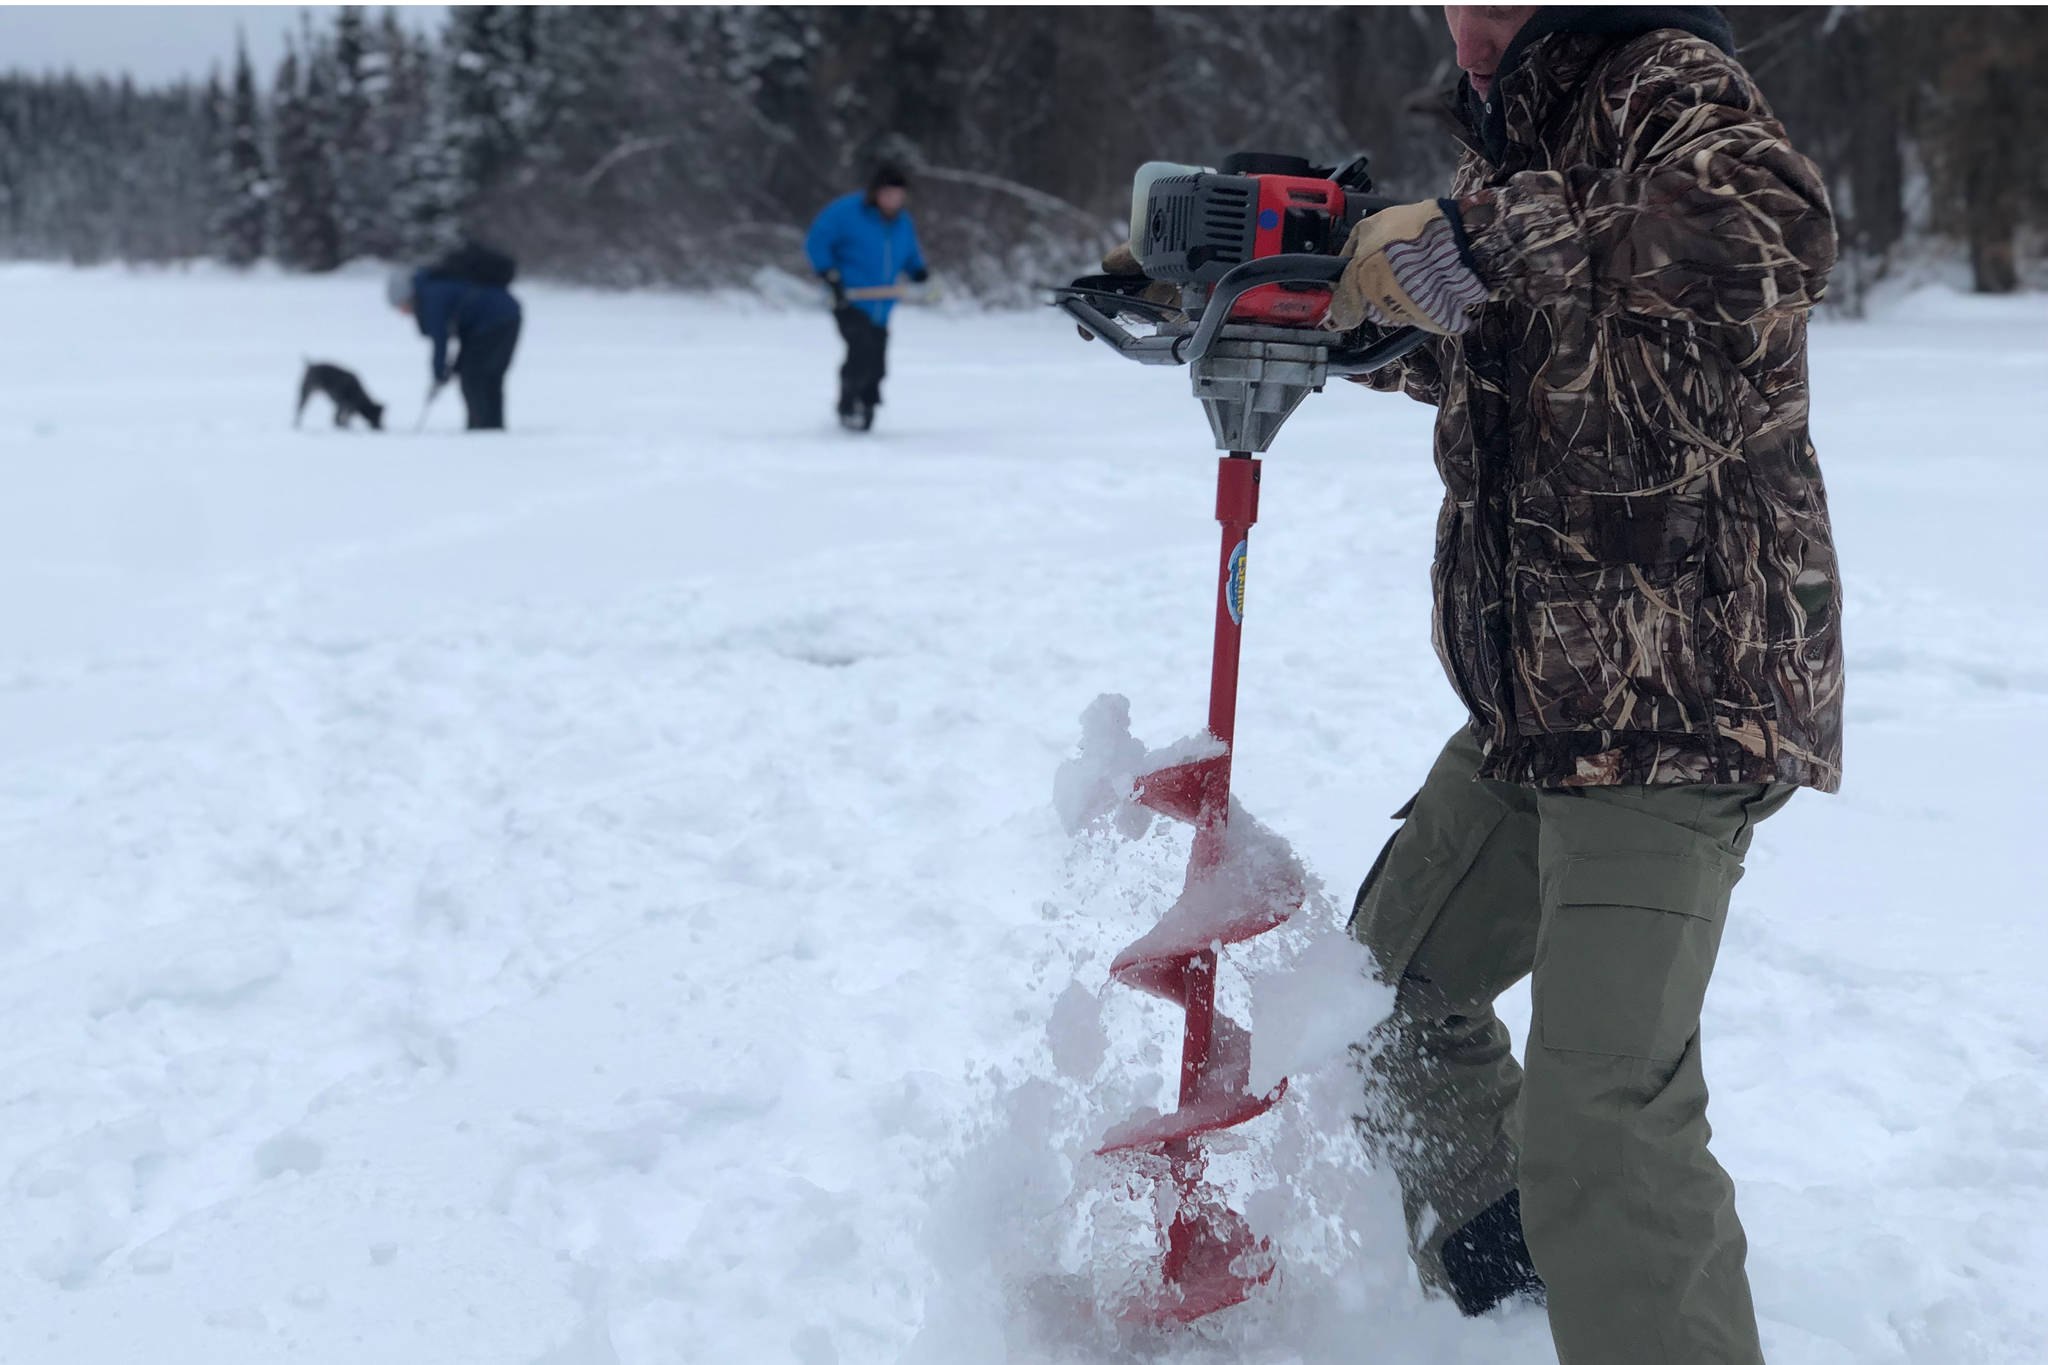 Dillon Jensen drills a hole into Paddle Lake off of Swan Lake Road in Sterling, Alaska on Feb. 2, 2020. (Photo by Victoria Petersen/Peninsula Clarion)